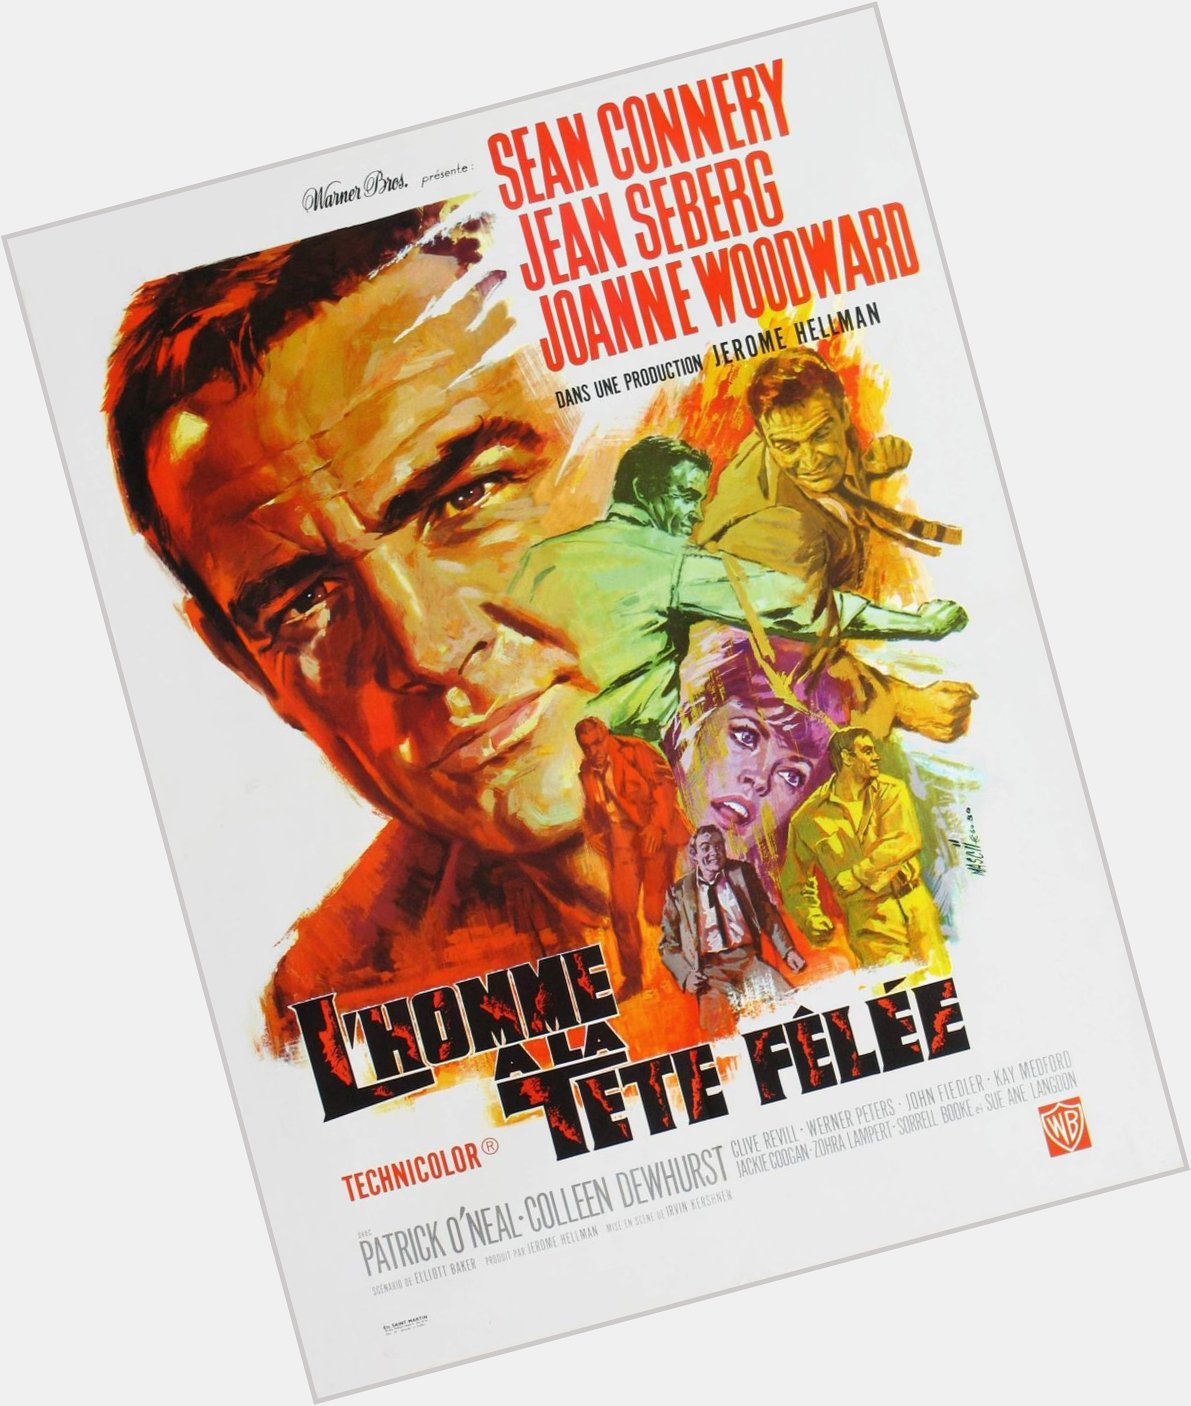 Happy Birthday Sean Connery! - A FINE MADNESS - 1966 - French poster - Art by Jean Mascii 